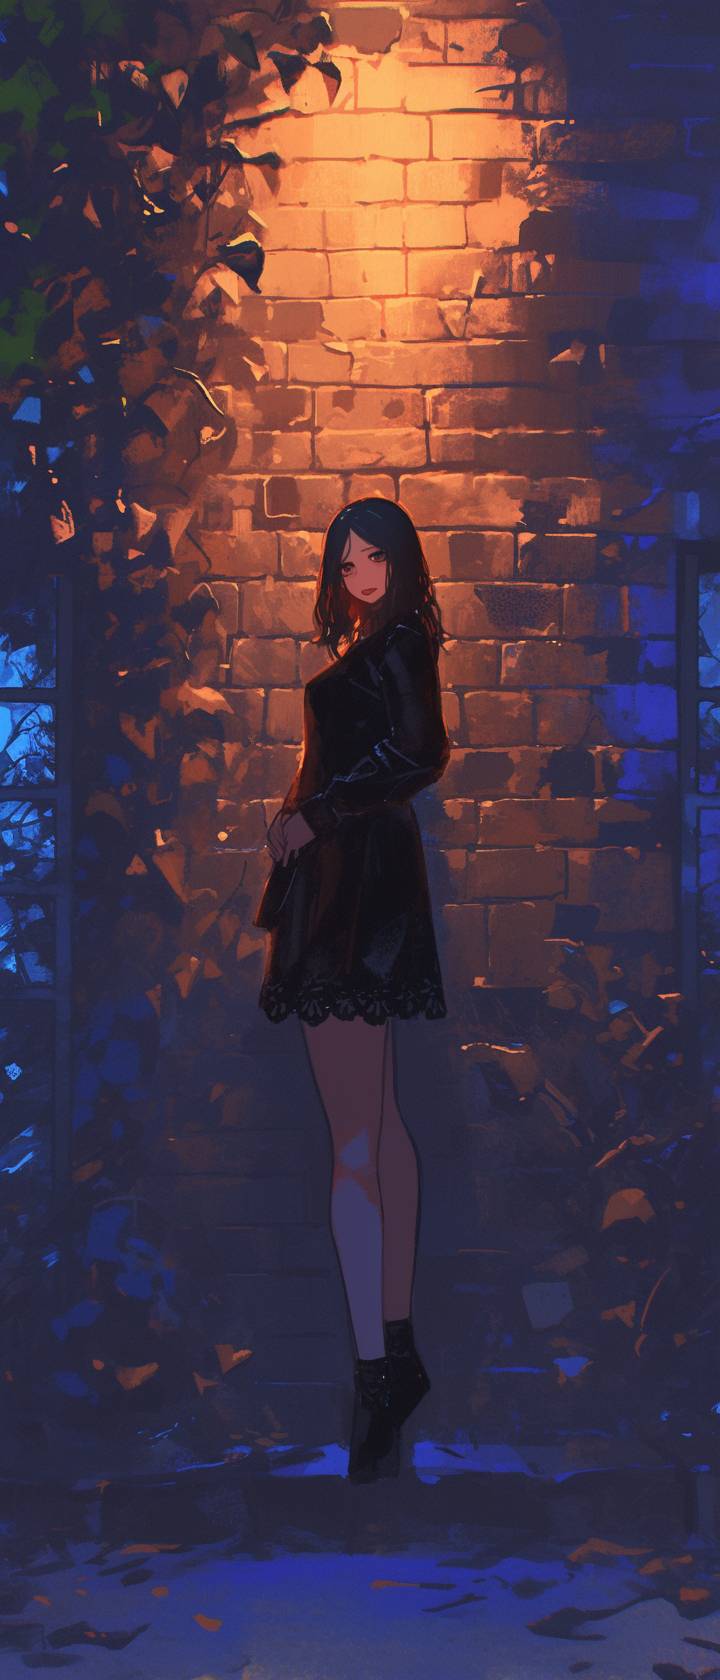 Brunette woman facing the camera against a brick wall with ivy at night, wearing a black dress, with blue lighting and touches of green and soft purple, creating a sad atmosphere evoking nostalgia